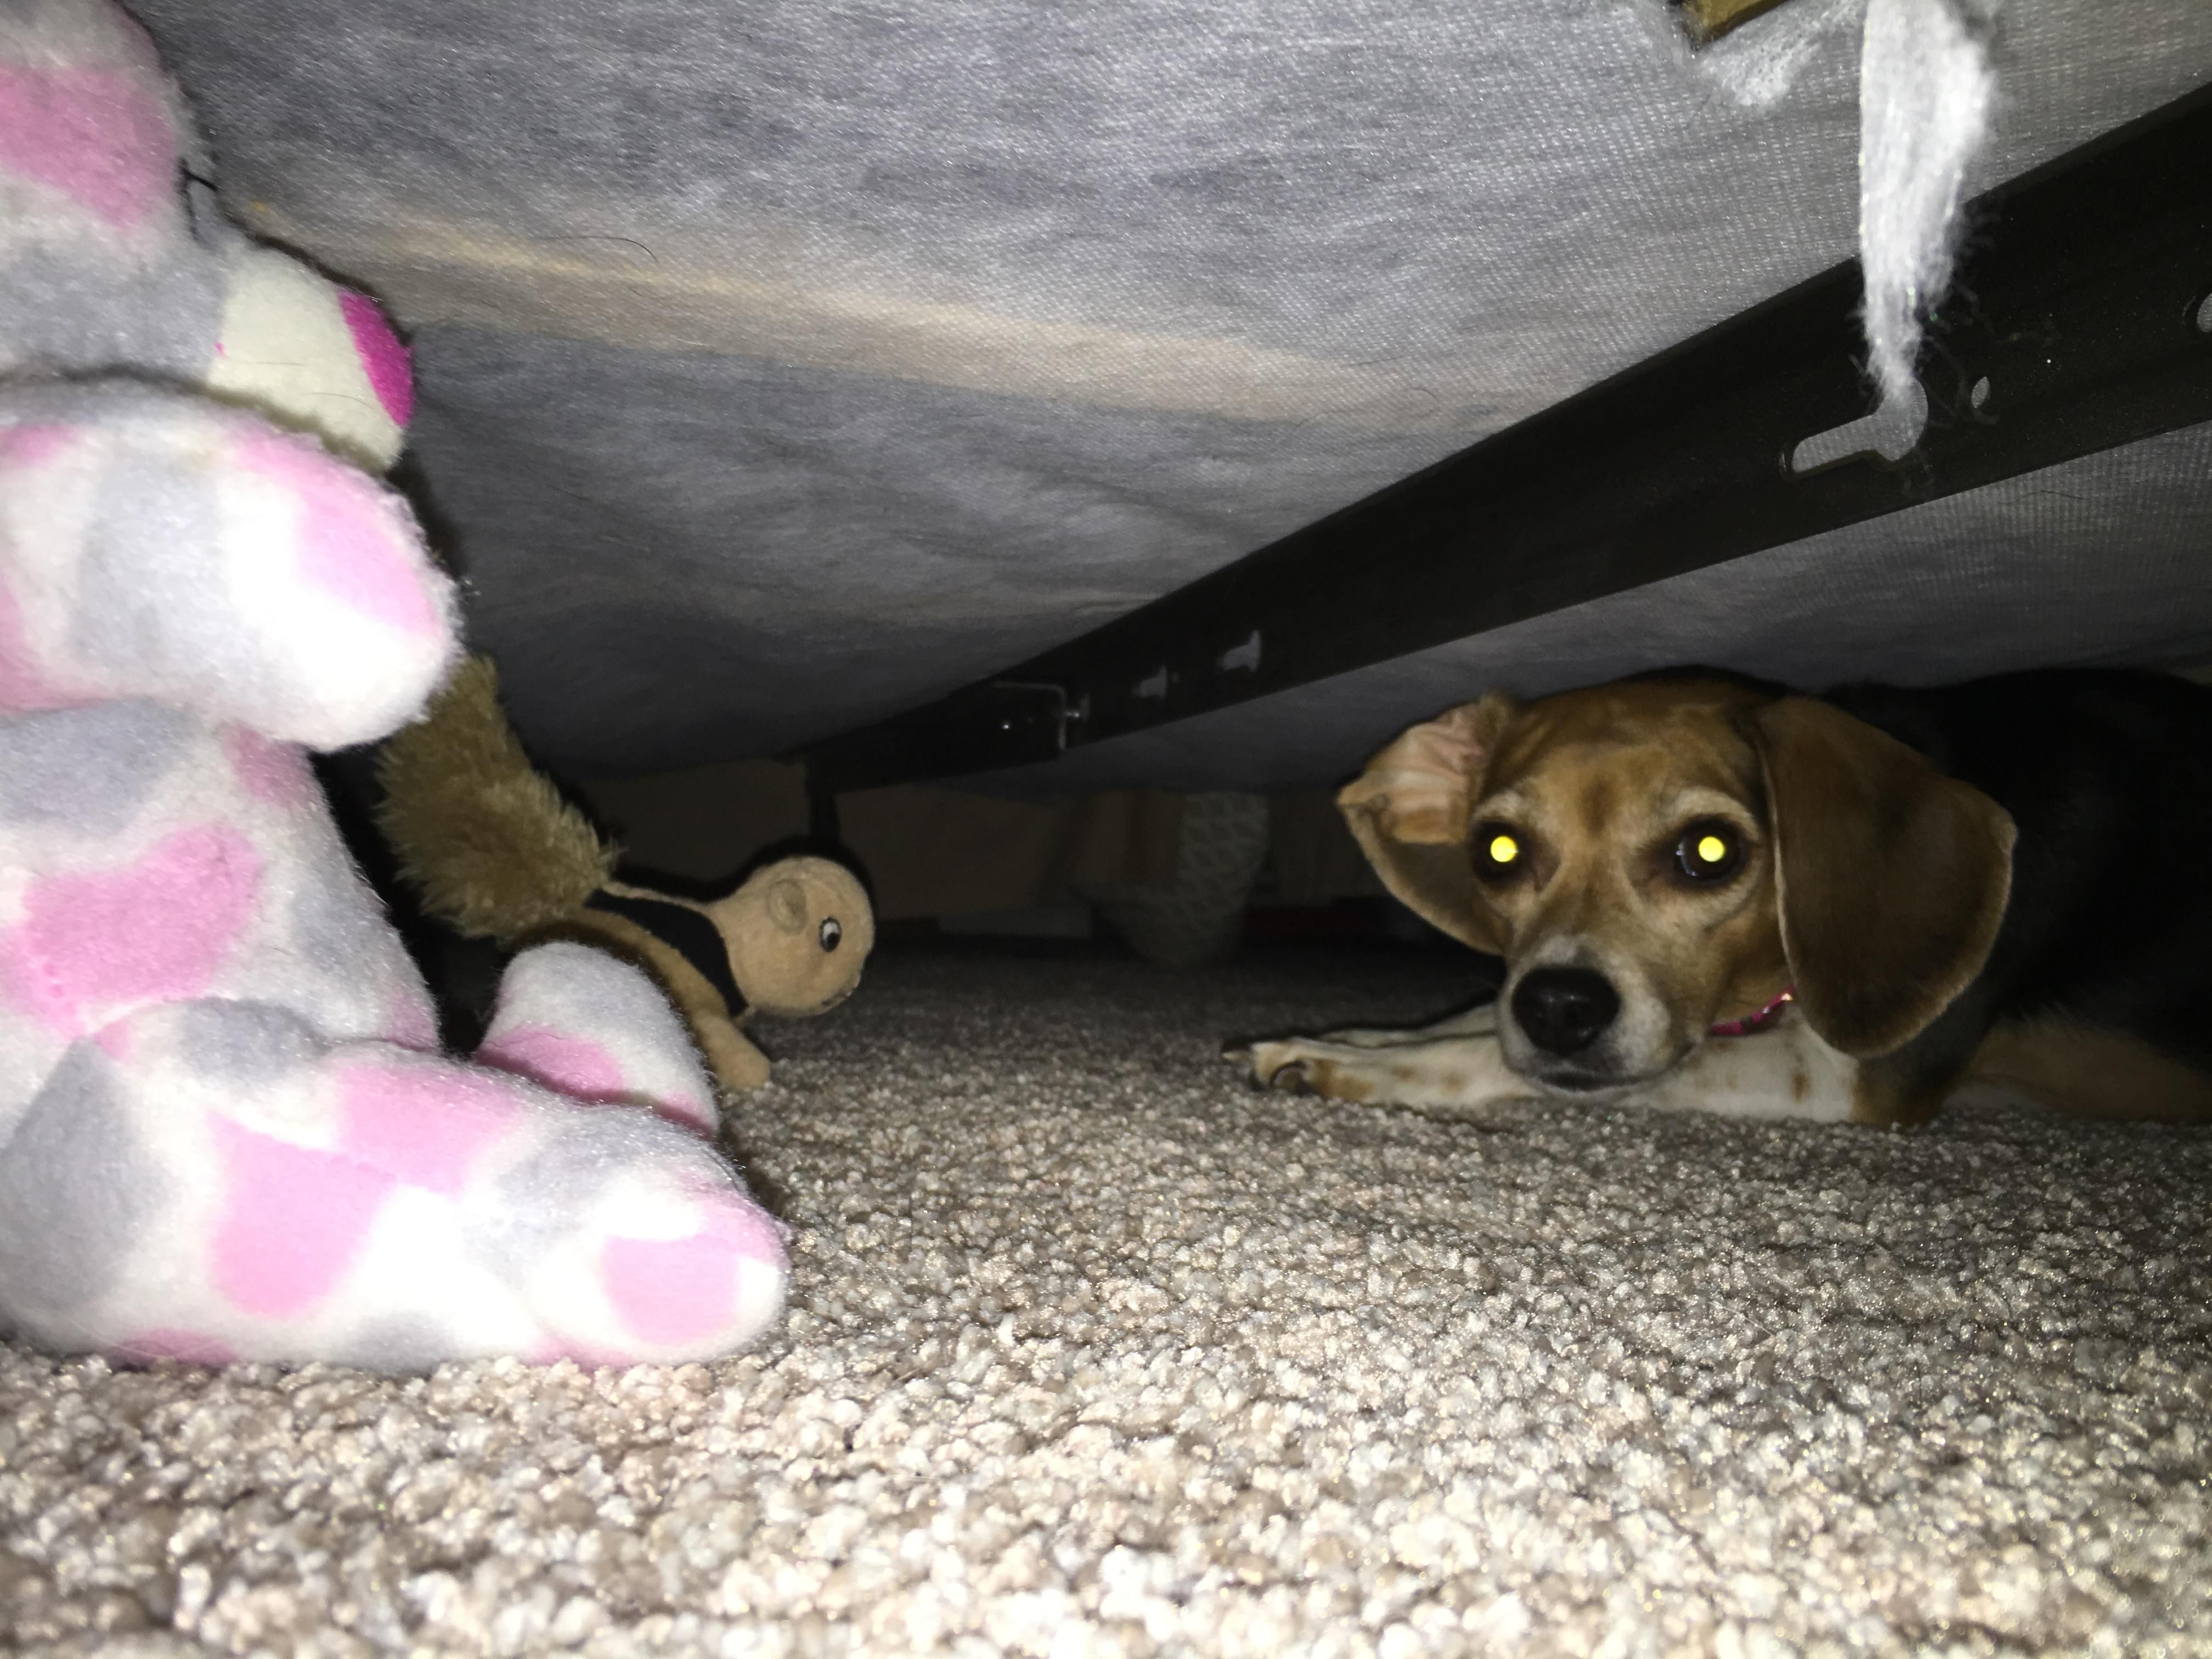 Came across my dog's butt sticking out from under the bed. I think I interrupted some sort of secret meeting.